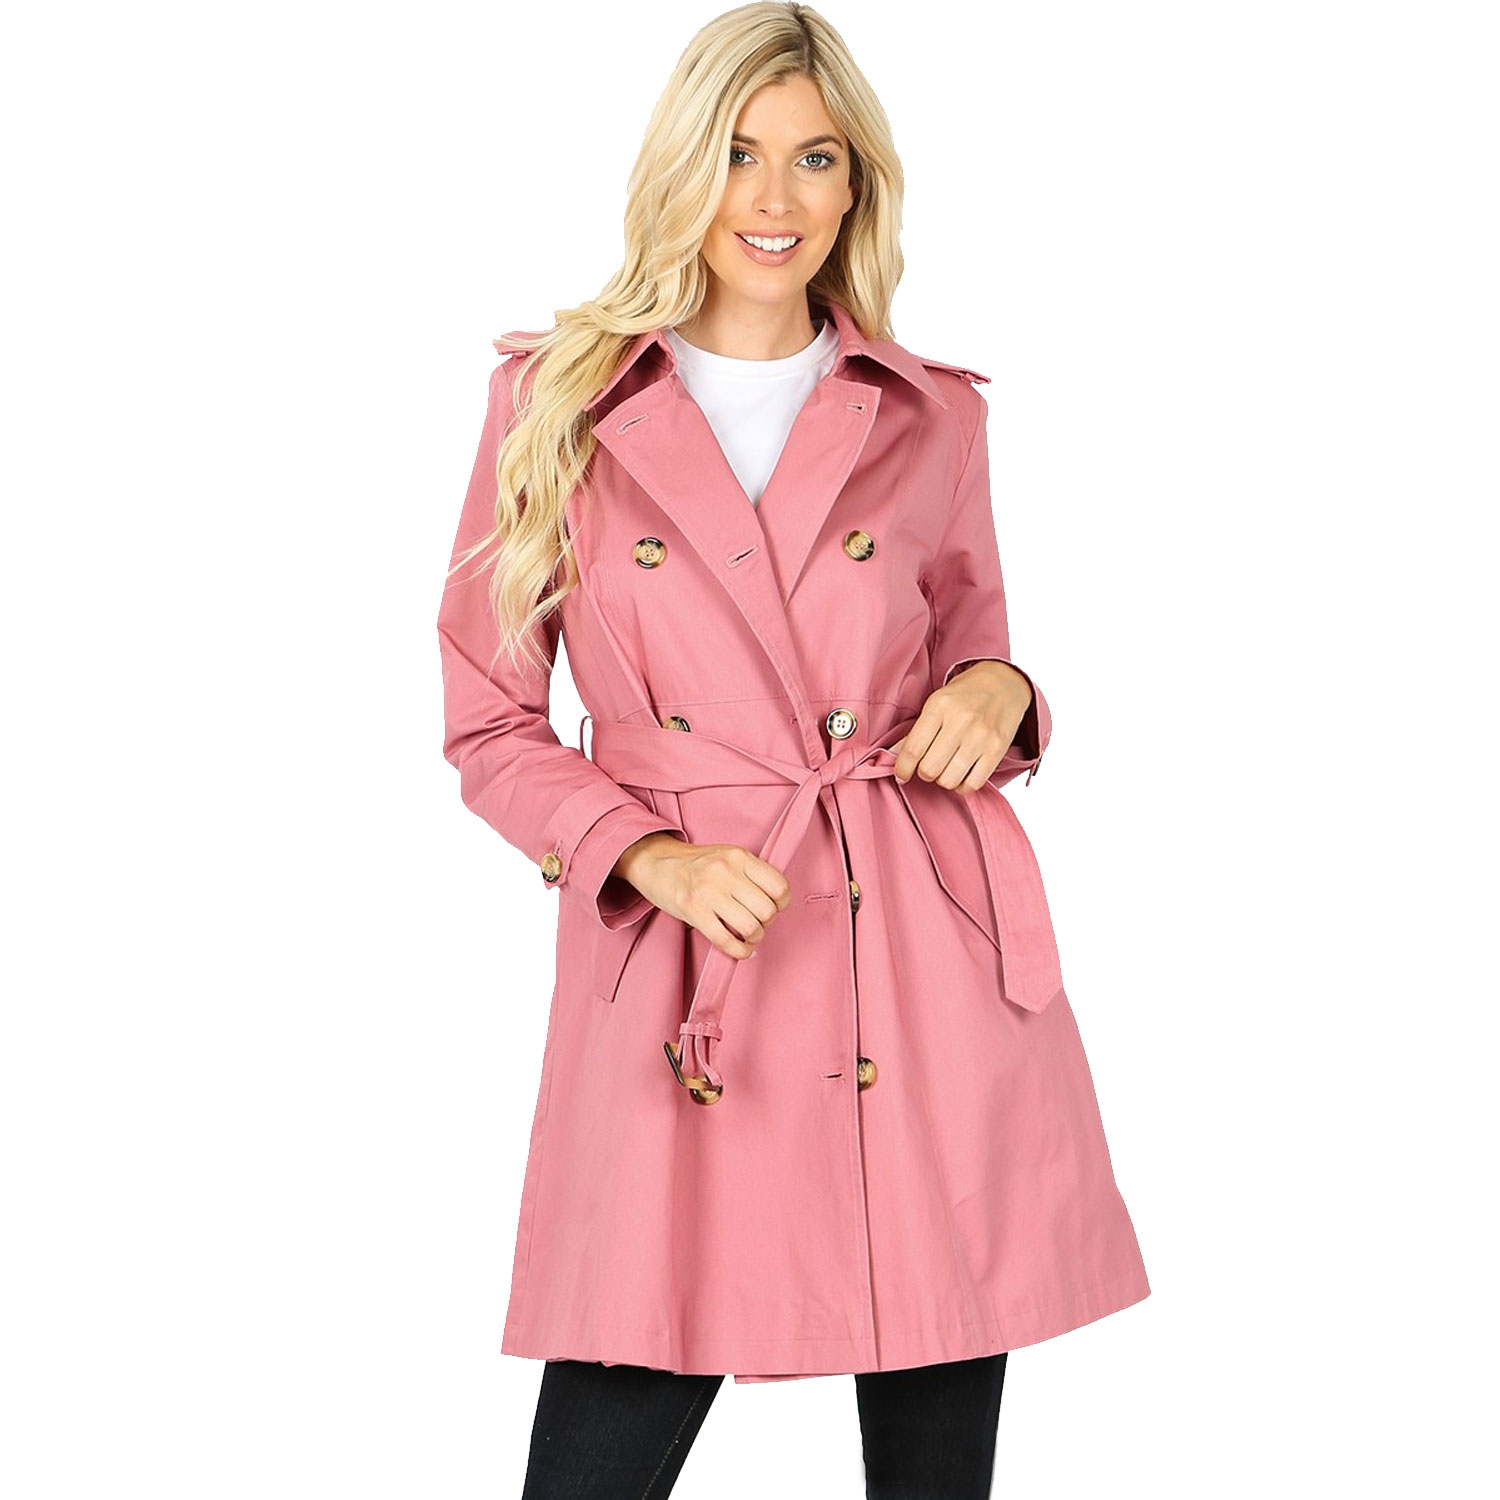 Double Breasted Thigh Length Trench Coat